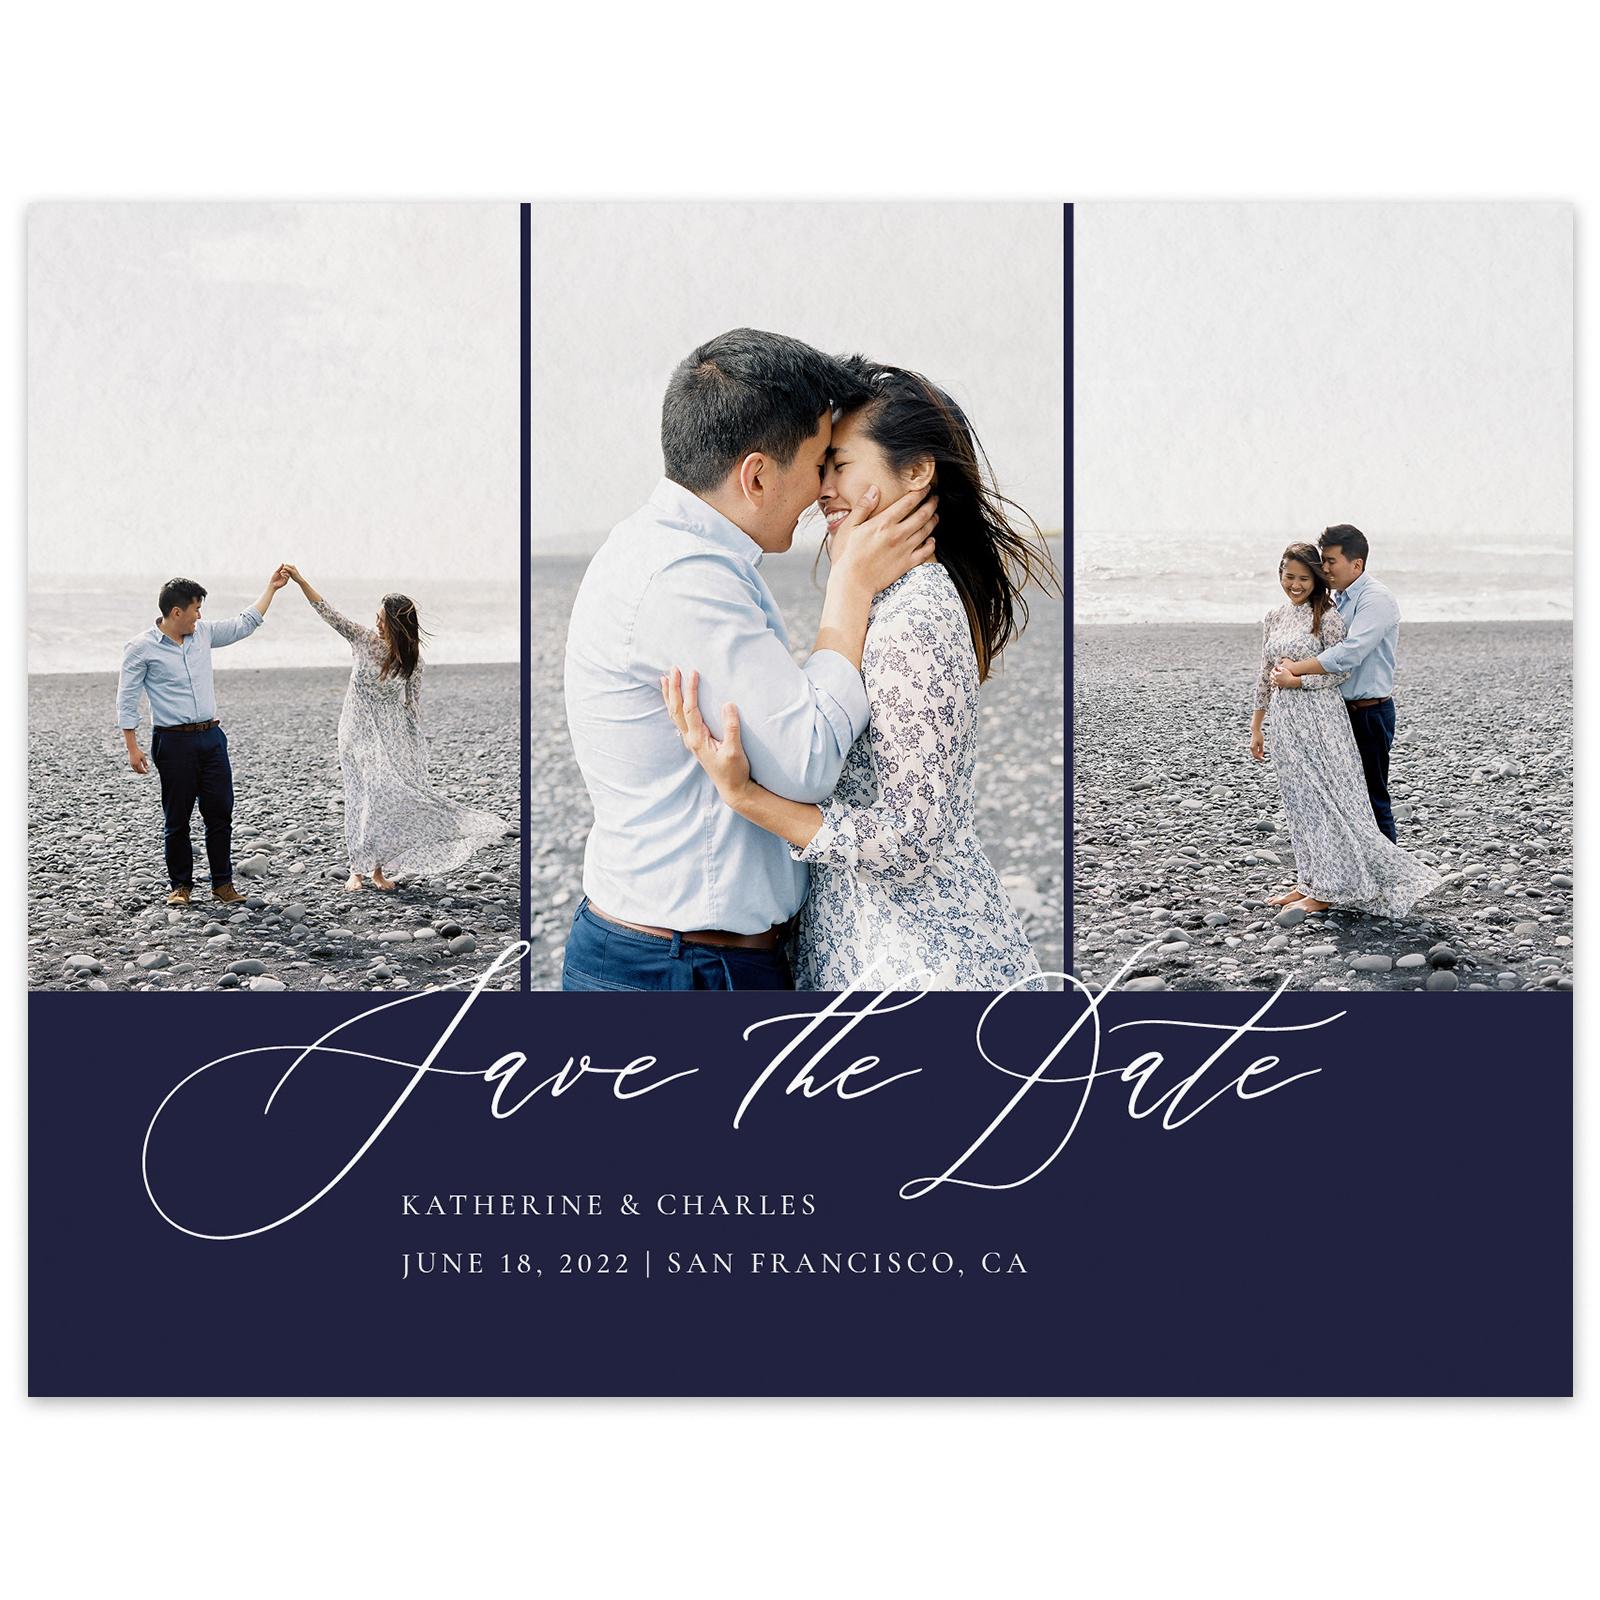 Black Save The Date Card Templates - Zola